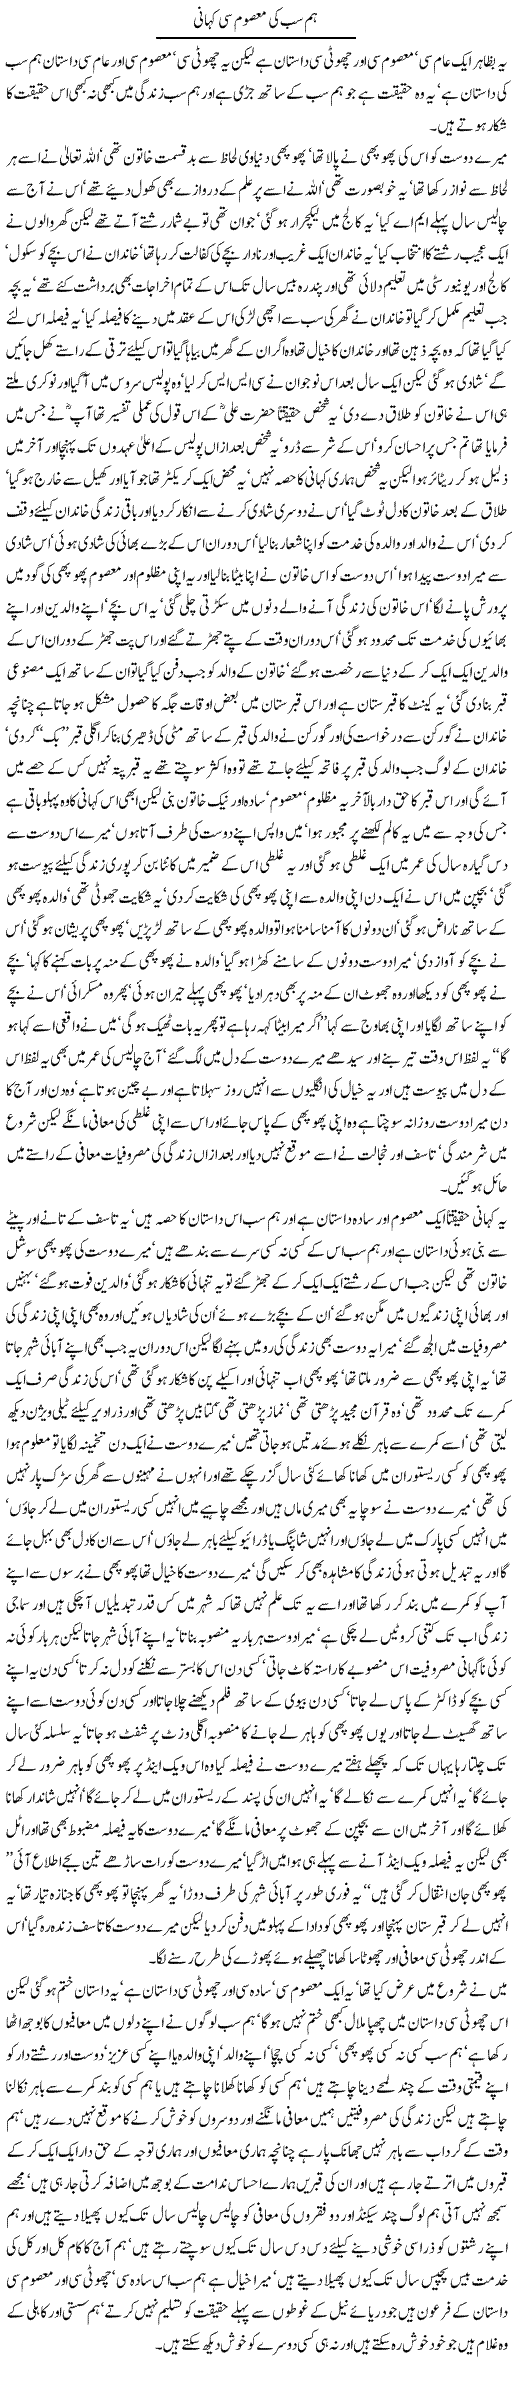 Innocent Story Express Column Javed Chaudhry 20 February 2011